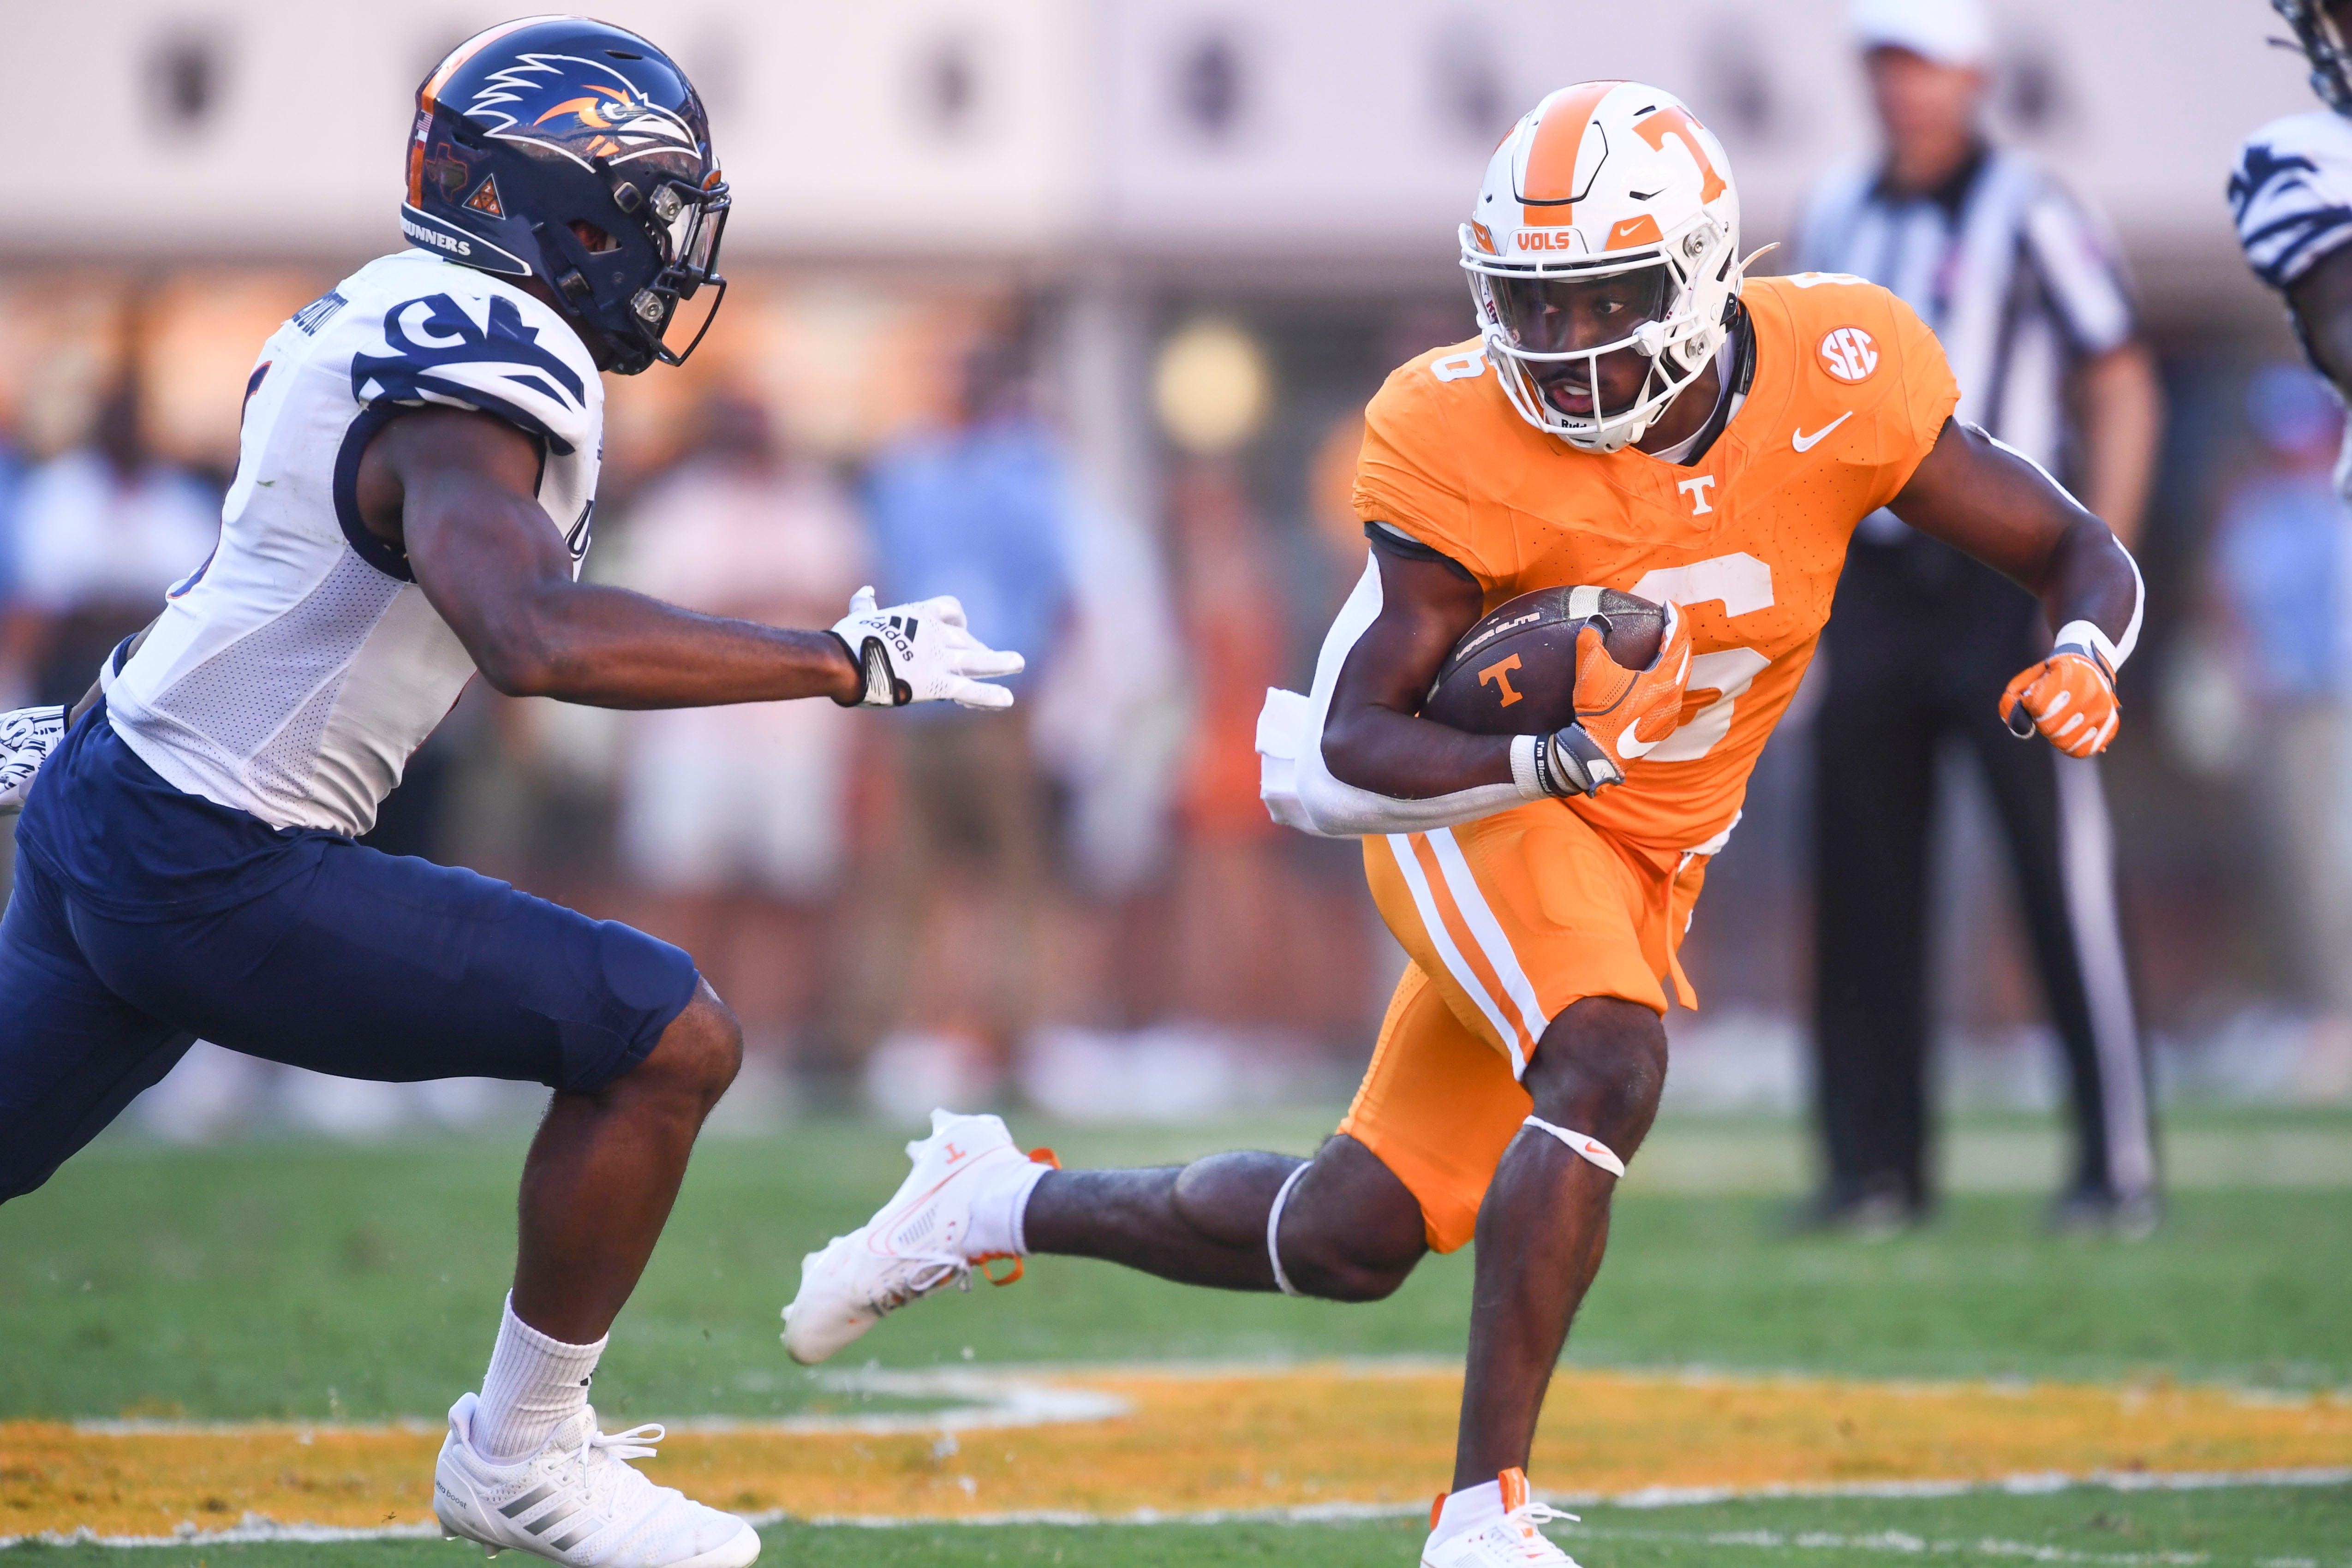 Nico is MVP for Tennessee football, but who else can Vols least afford to lose? Adams